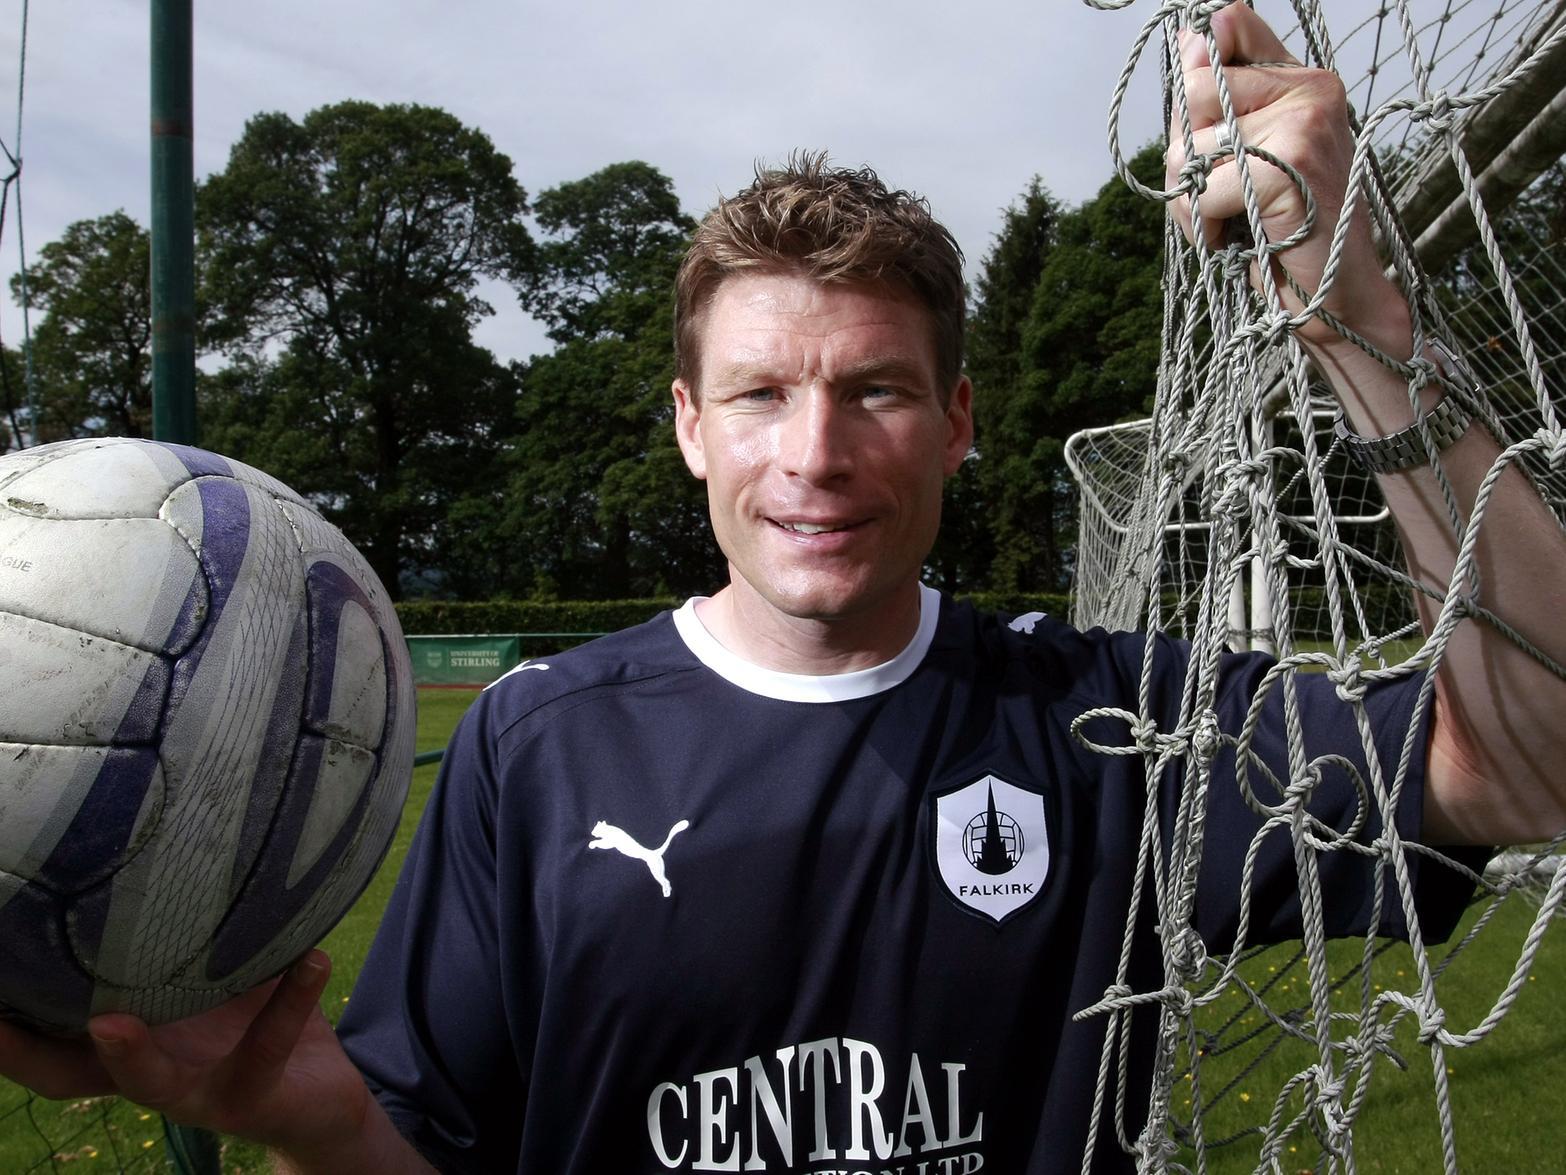 The Bairns' captain that day left in 2015 to join Brechin City. He then transitioned in to the manager's role at Glebe Park before being relieved of his duties in 2018.